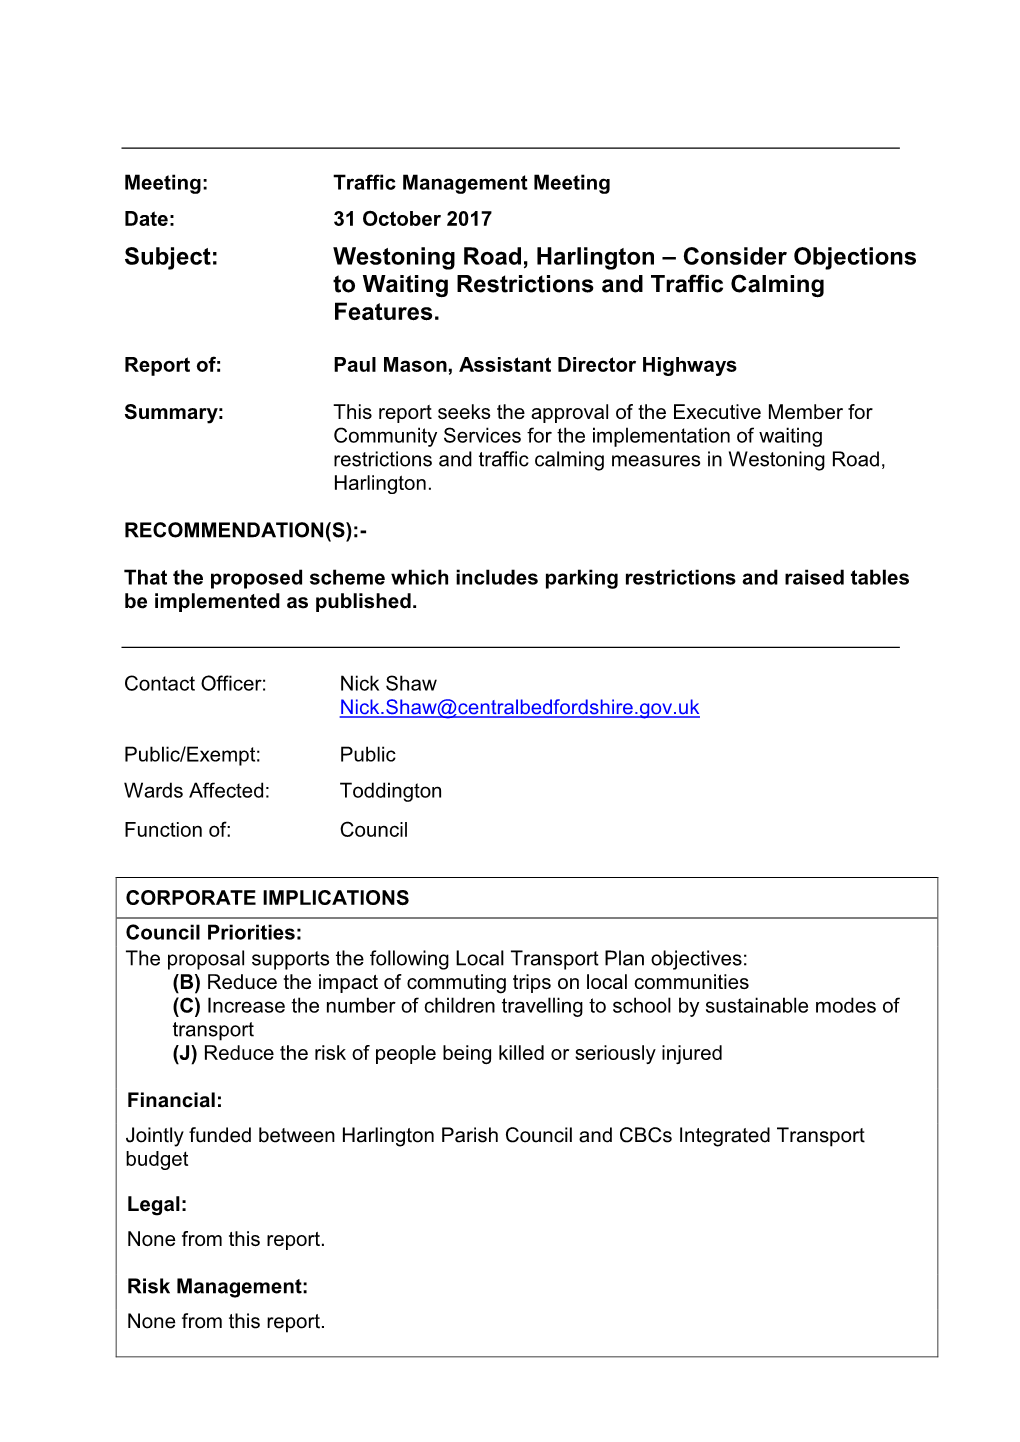 Subject: Westoning Road, Harlington – Consider Objections to Waiting Restrictions and Traffic Calming Features